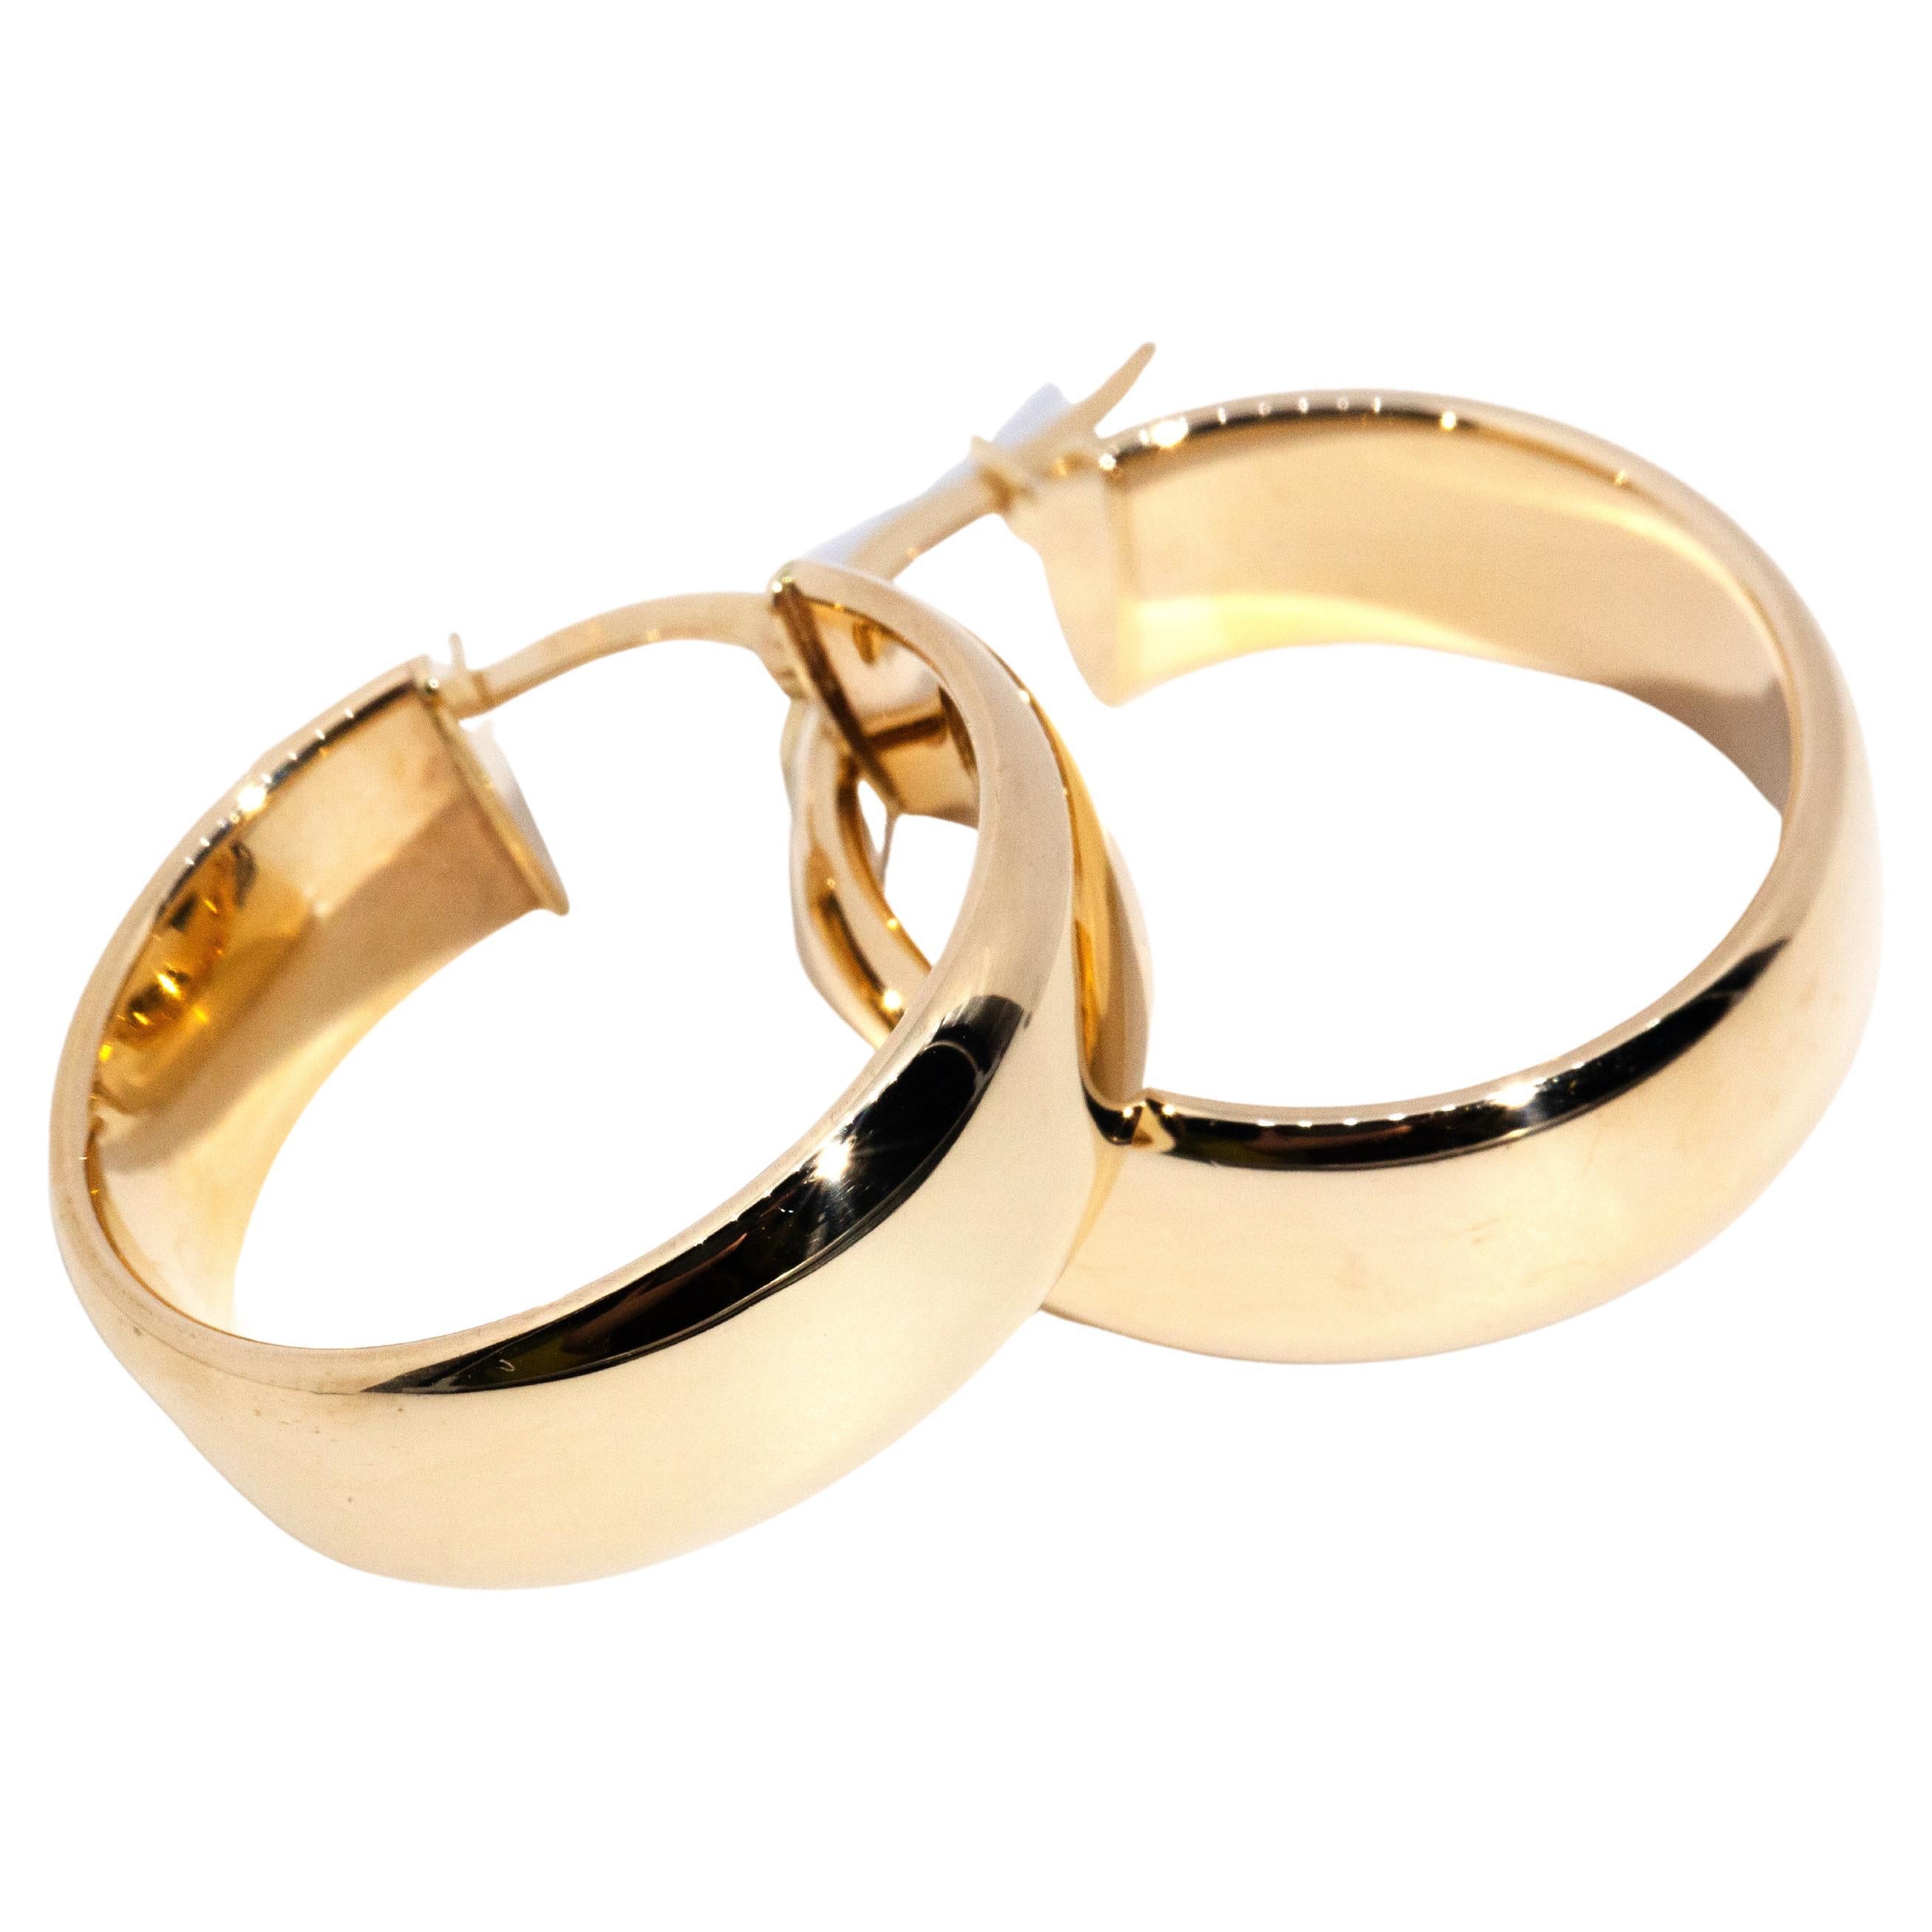 Contemporary 9 Carat Yellow Gold Curved Hinged Hoop Style Earrings